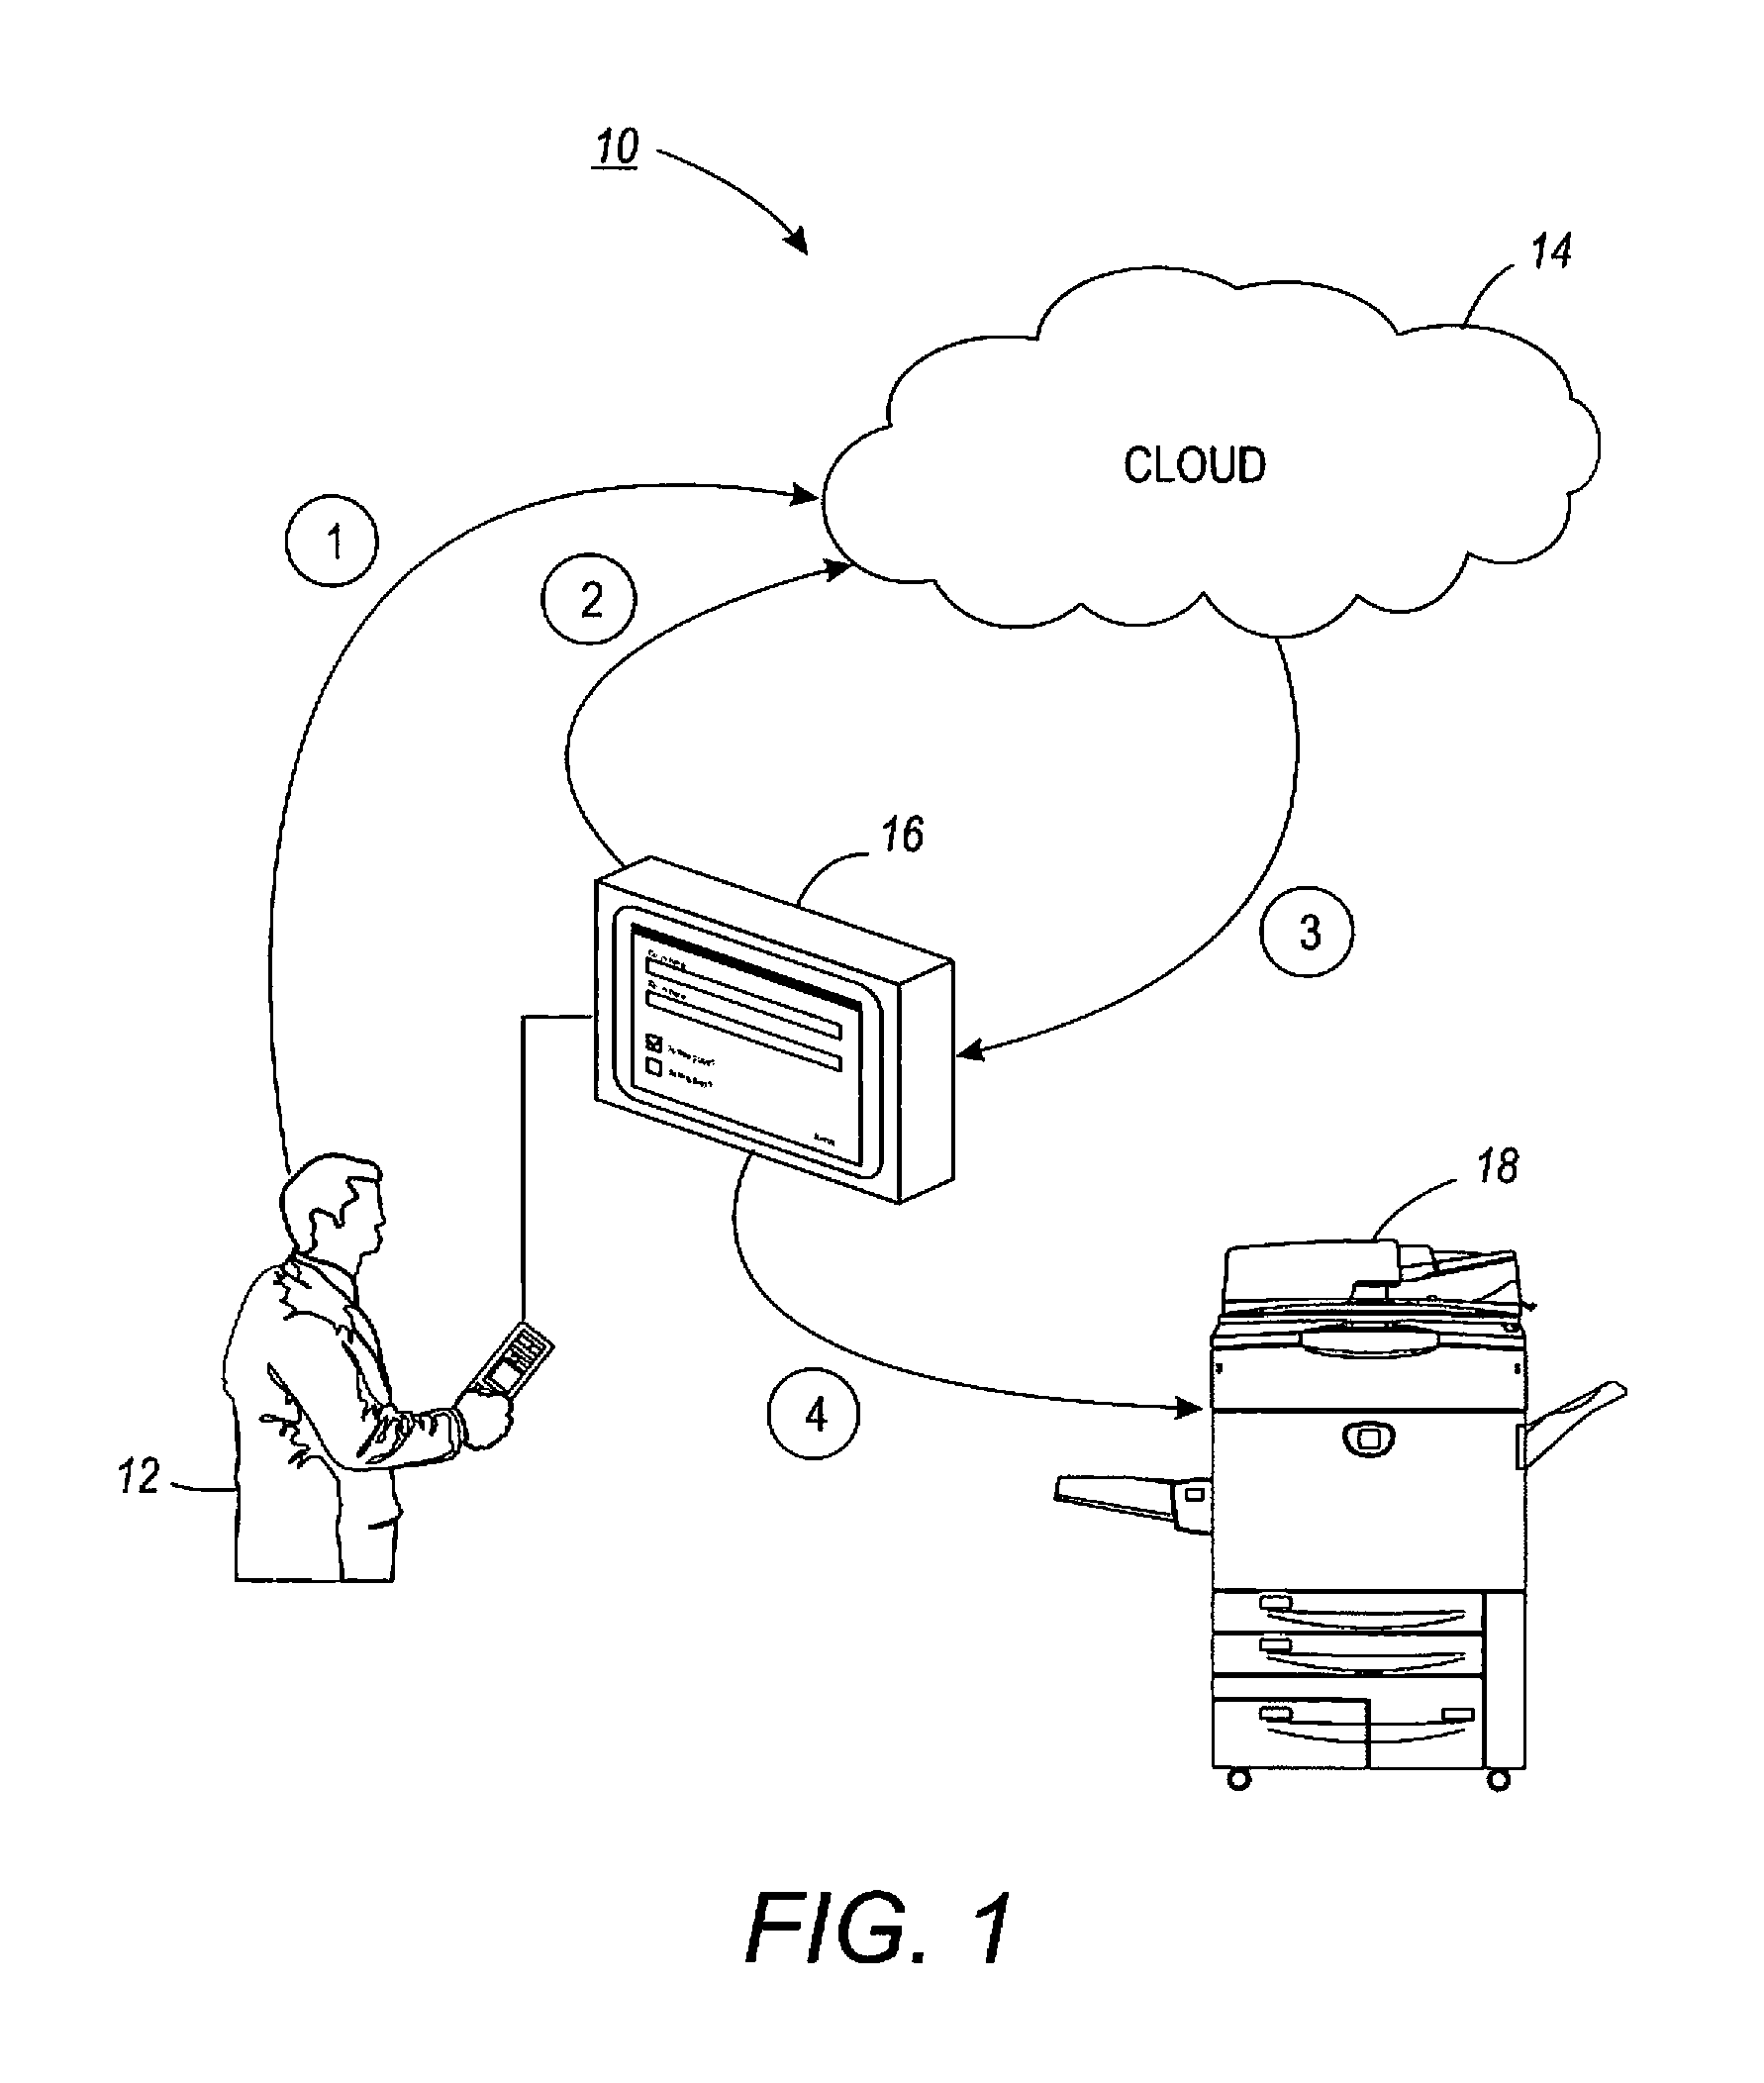 System and method for enabling a mobile customizable EIP interface to access multi-function devices